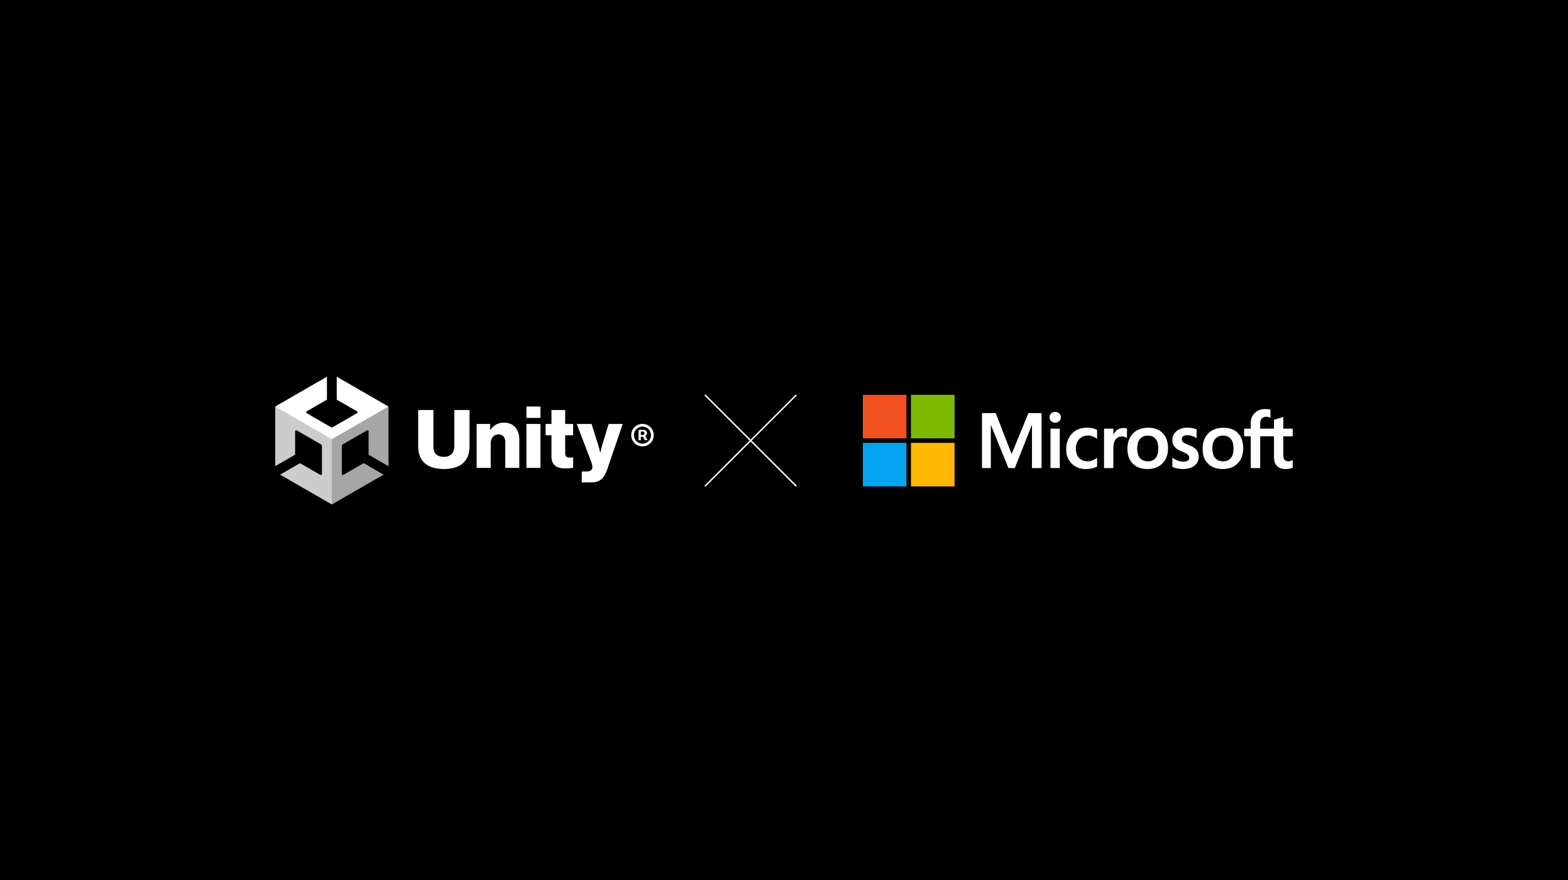 Unity logo and Microsoft logo side by side with an x in the middle showing partnership